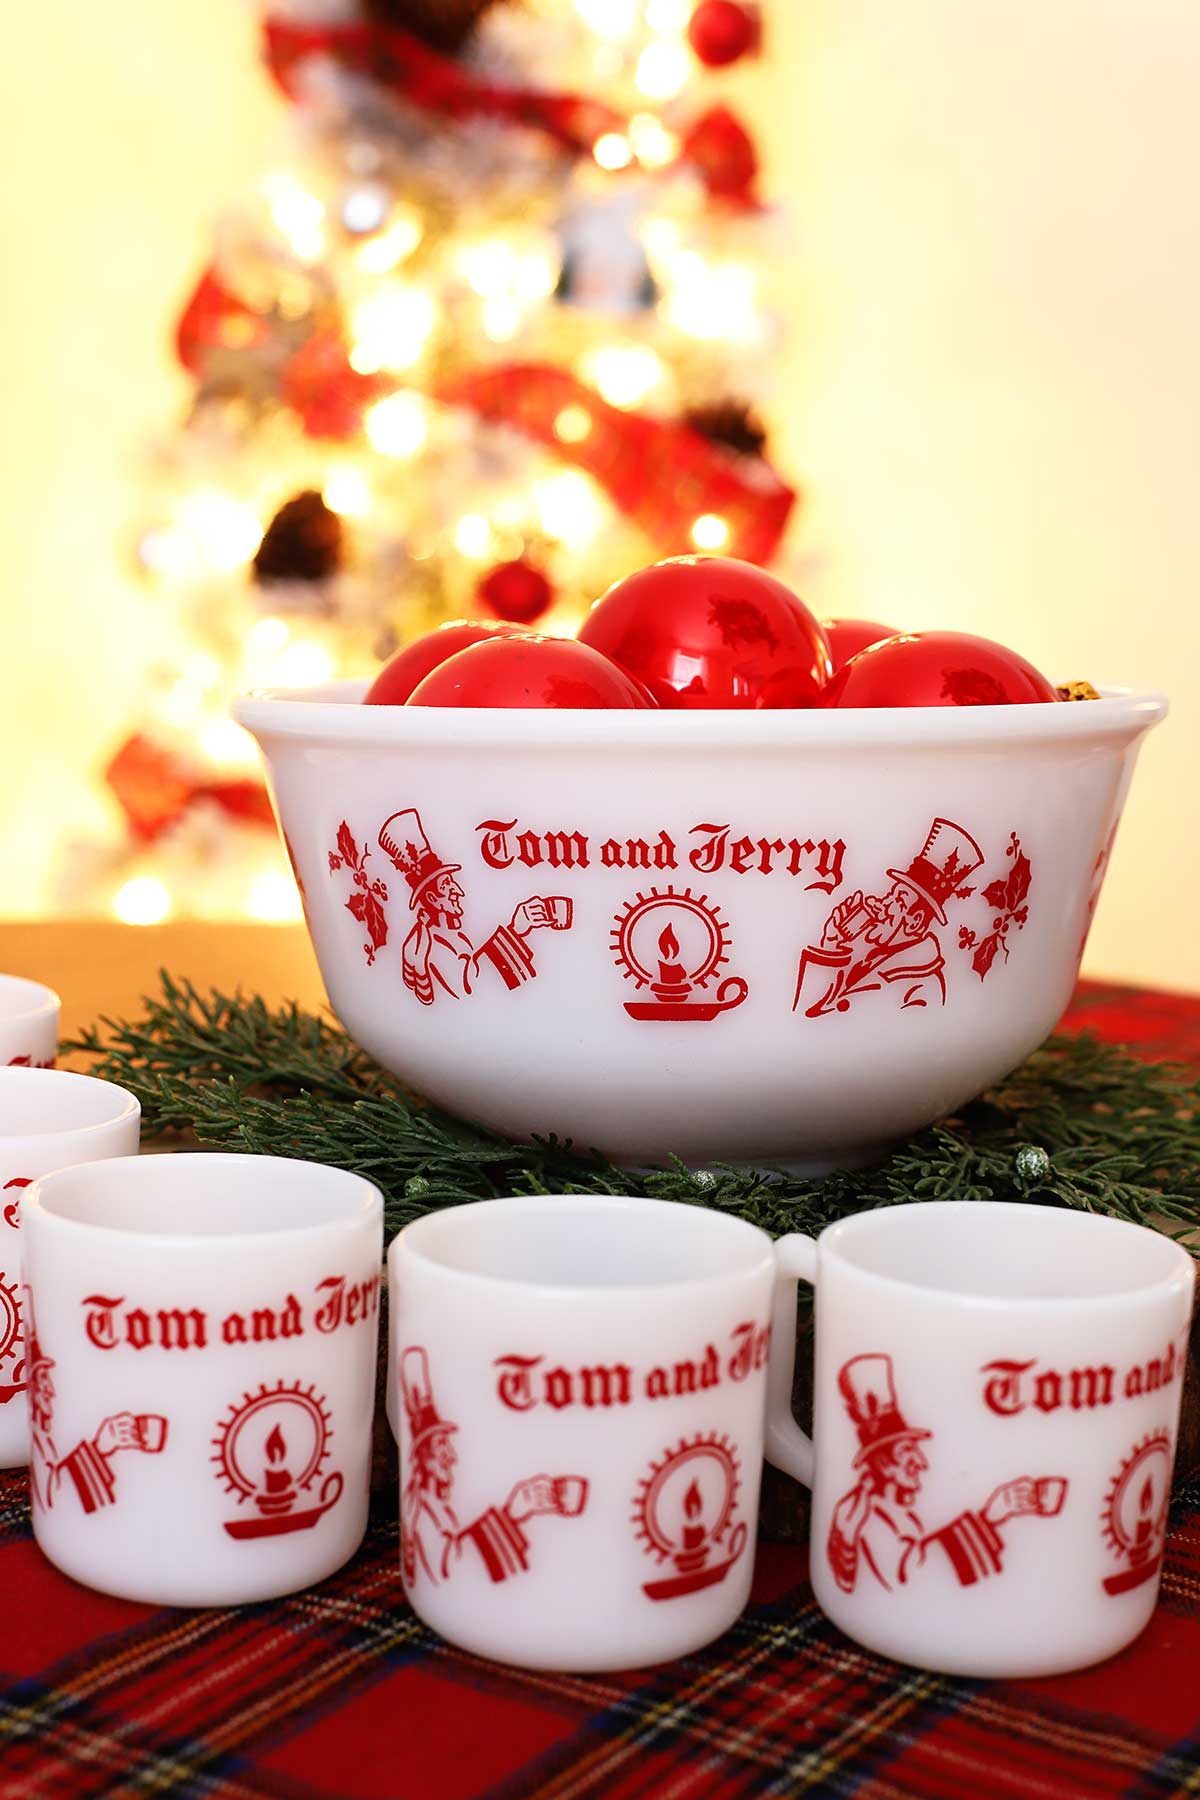 classic red and white milk glass Tom & Jerry set made by Hazel Atlas